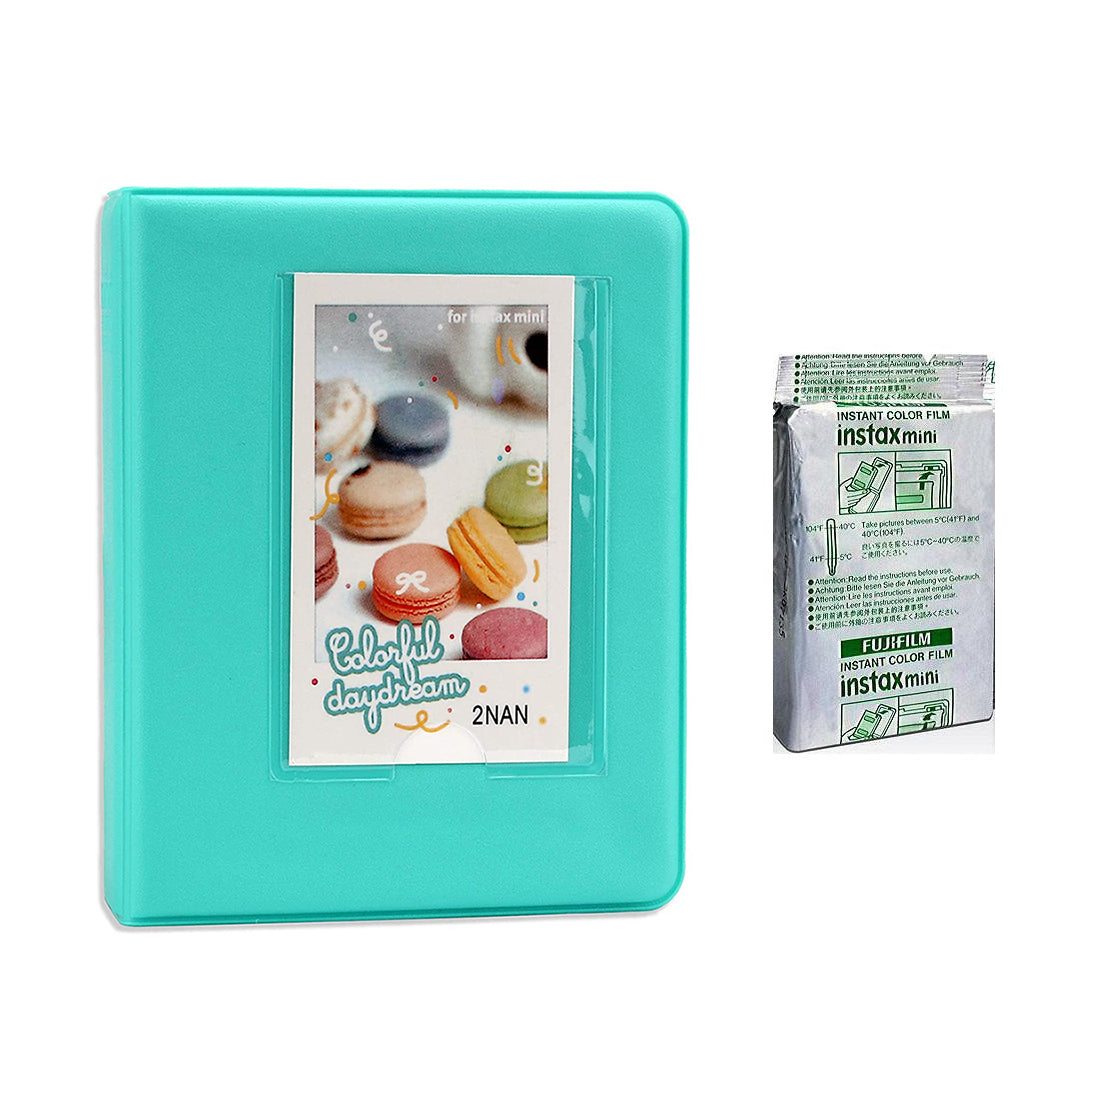 Fujifilm Instax Mini 10X1 candy pop Instant Film with Instax Time Photo Album 64 Sheets Mint Green